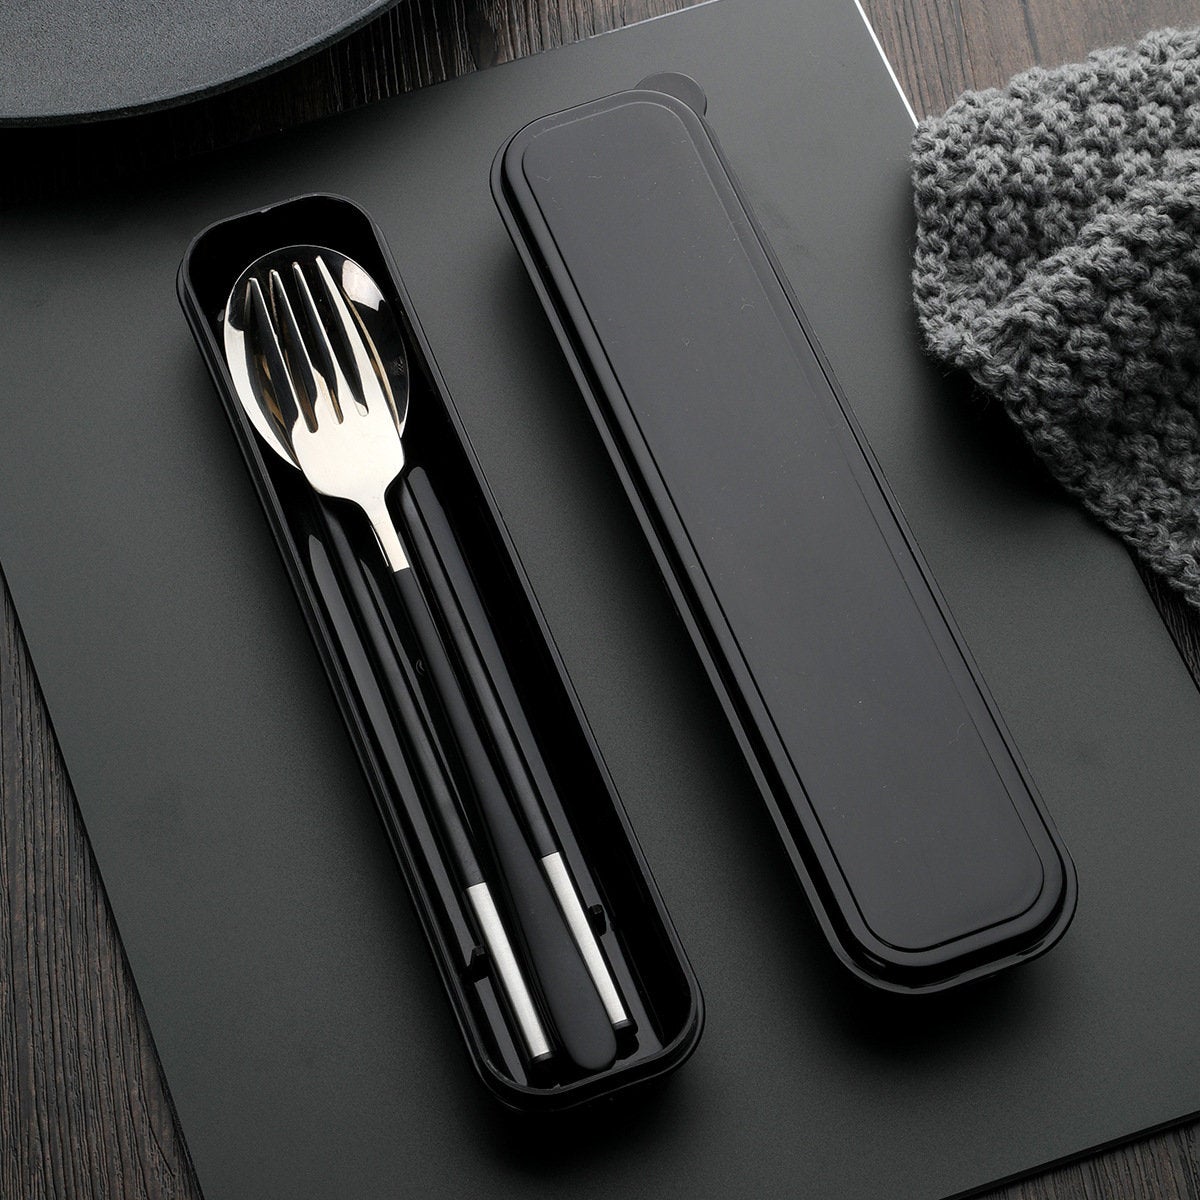 Travel Utensils with Case, Camping Utensil Set Rrusable Utensils Set with Case, Plastic Cutlery Set Forks Spoon Tableware, Portable Camping Cutlery